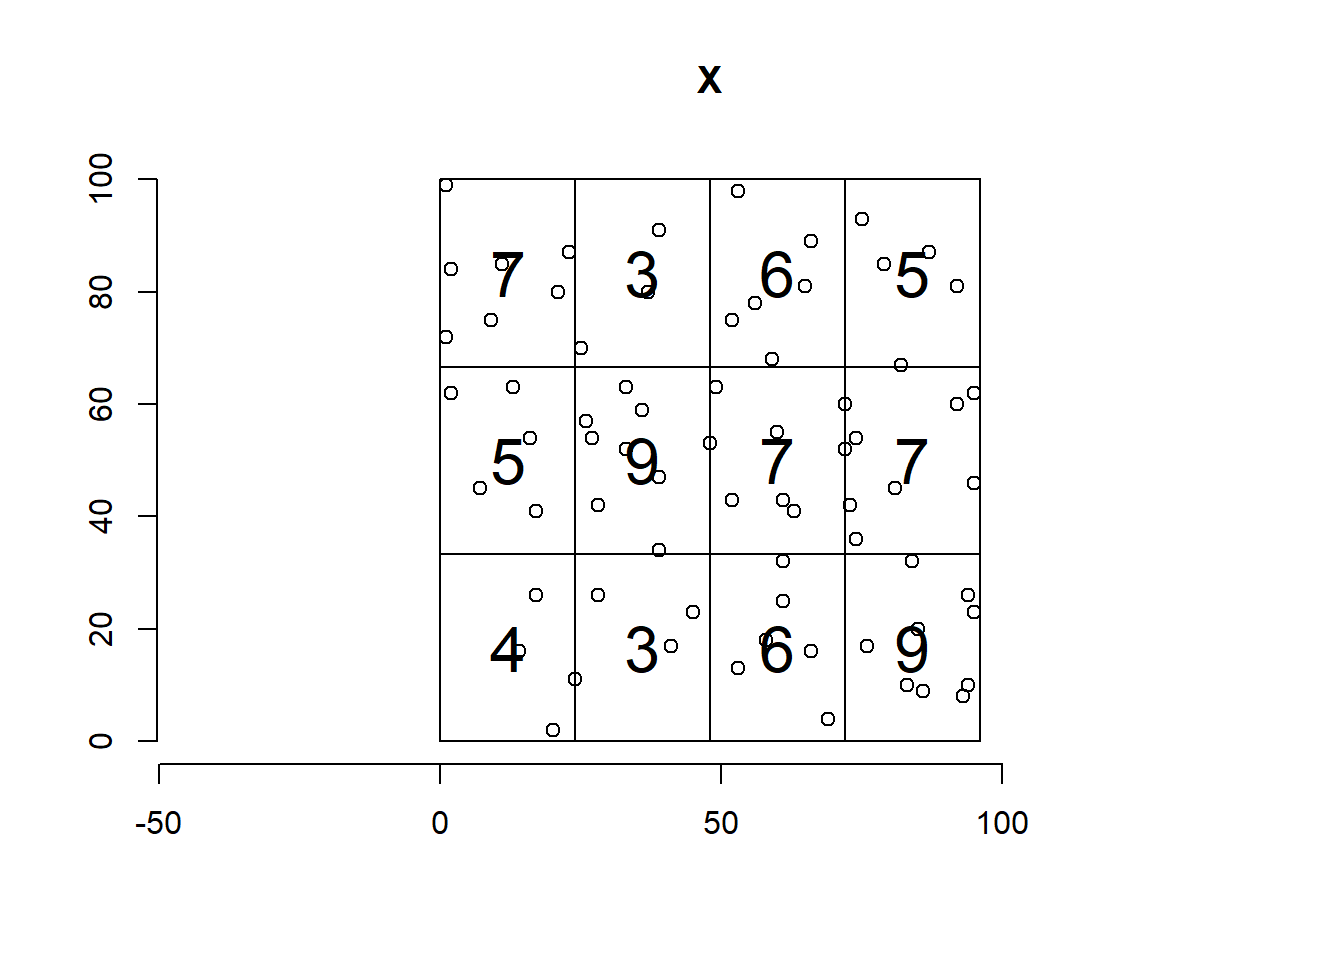 Number of points in each of the quadrats of a 4 \(\times\) 3 division of the observation window.